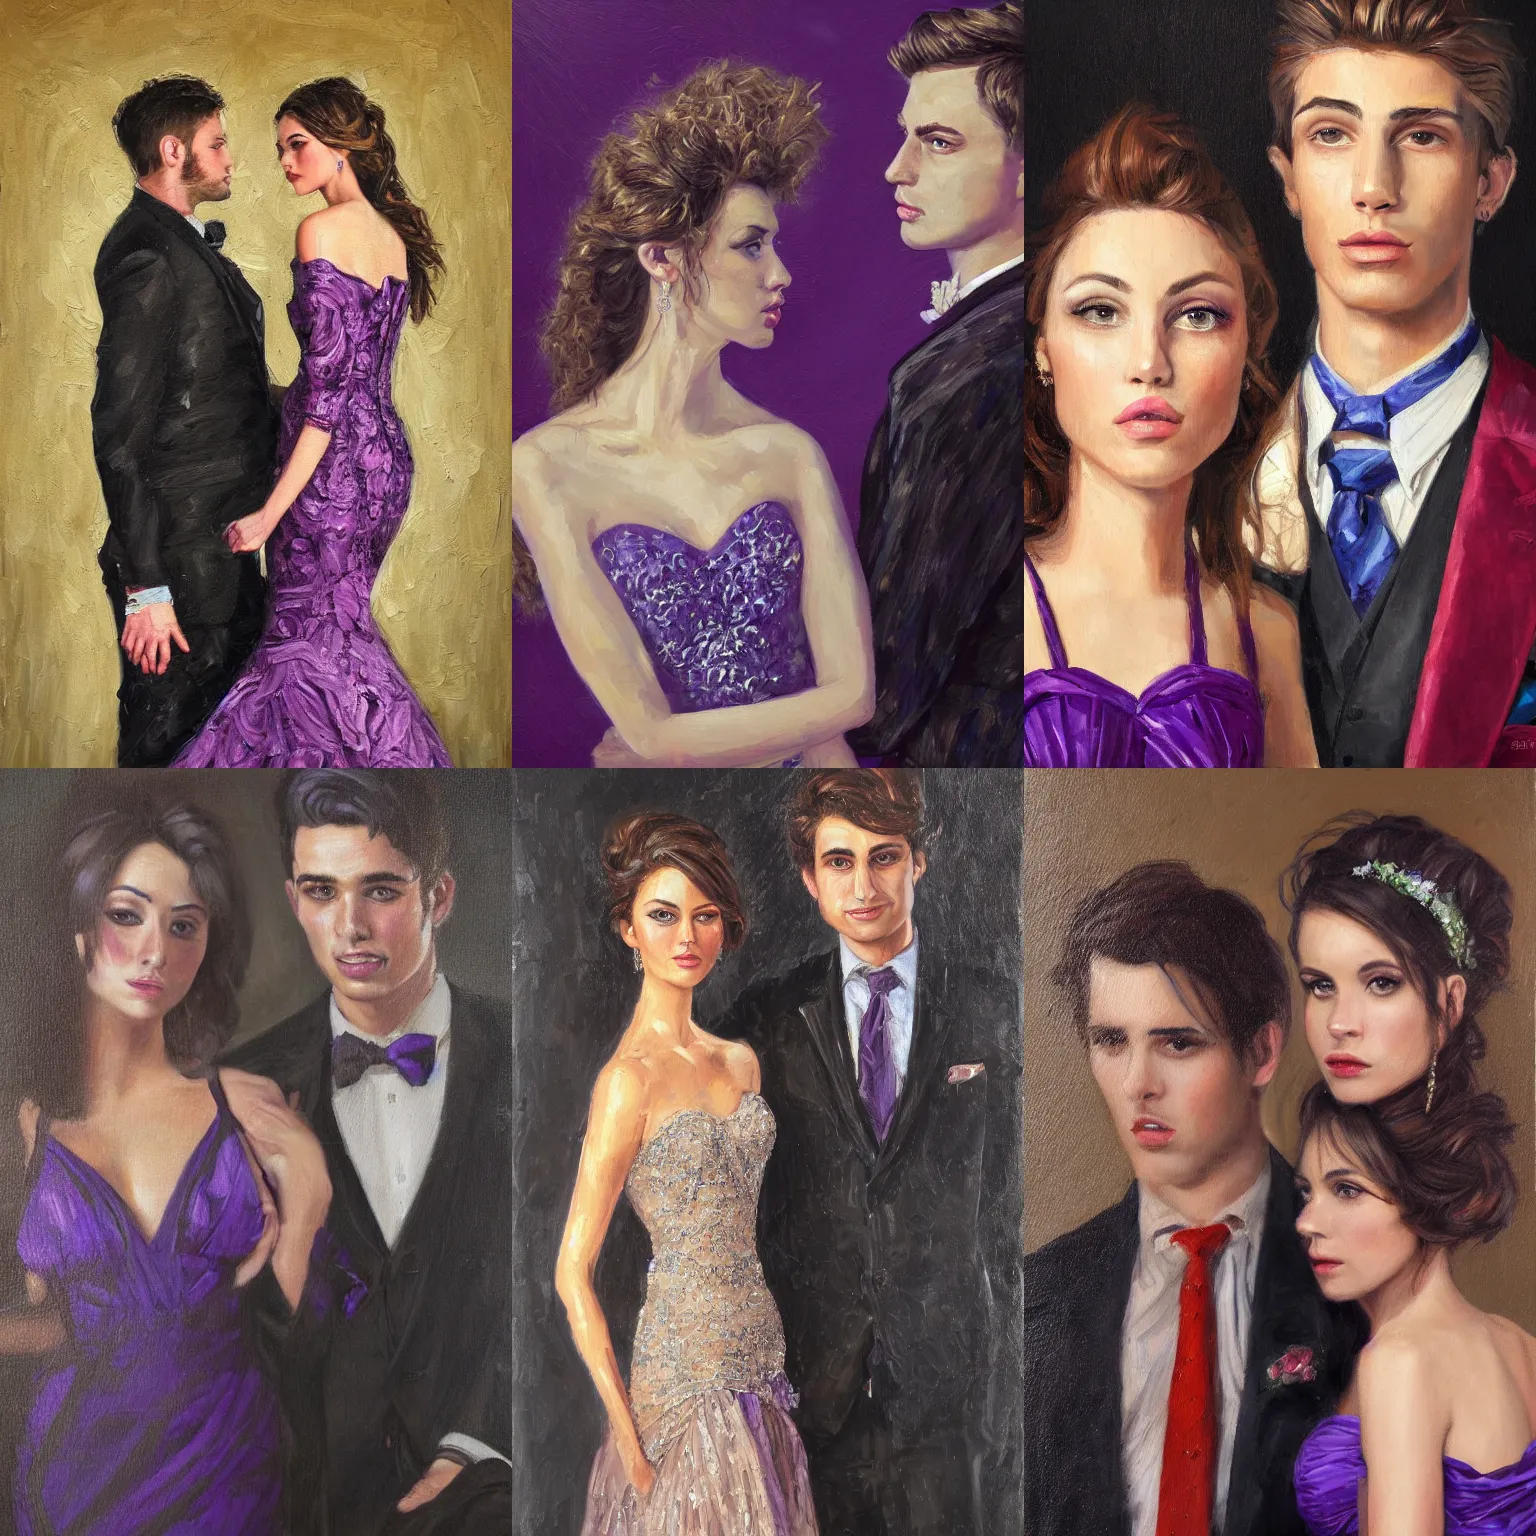 Prompt: a oil painting portrait of an attractive man and woman going to a prom, brunettes, highly detailed, symetrical detailed faces, rule of thirds, digital art, purple accents